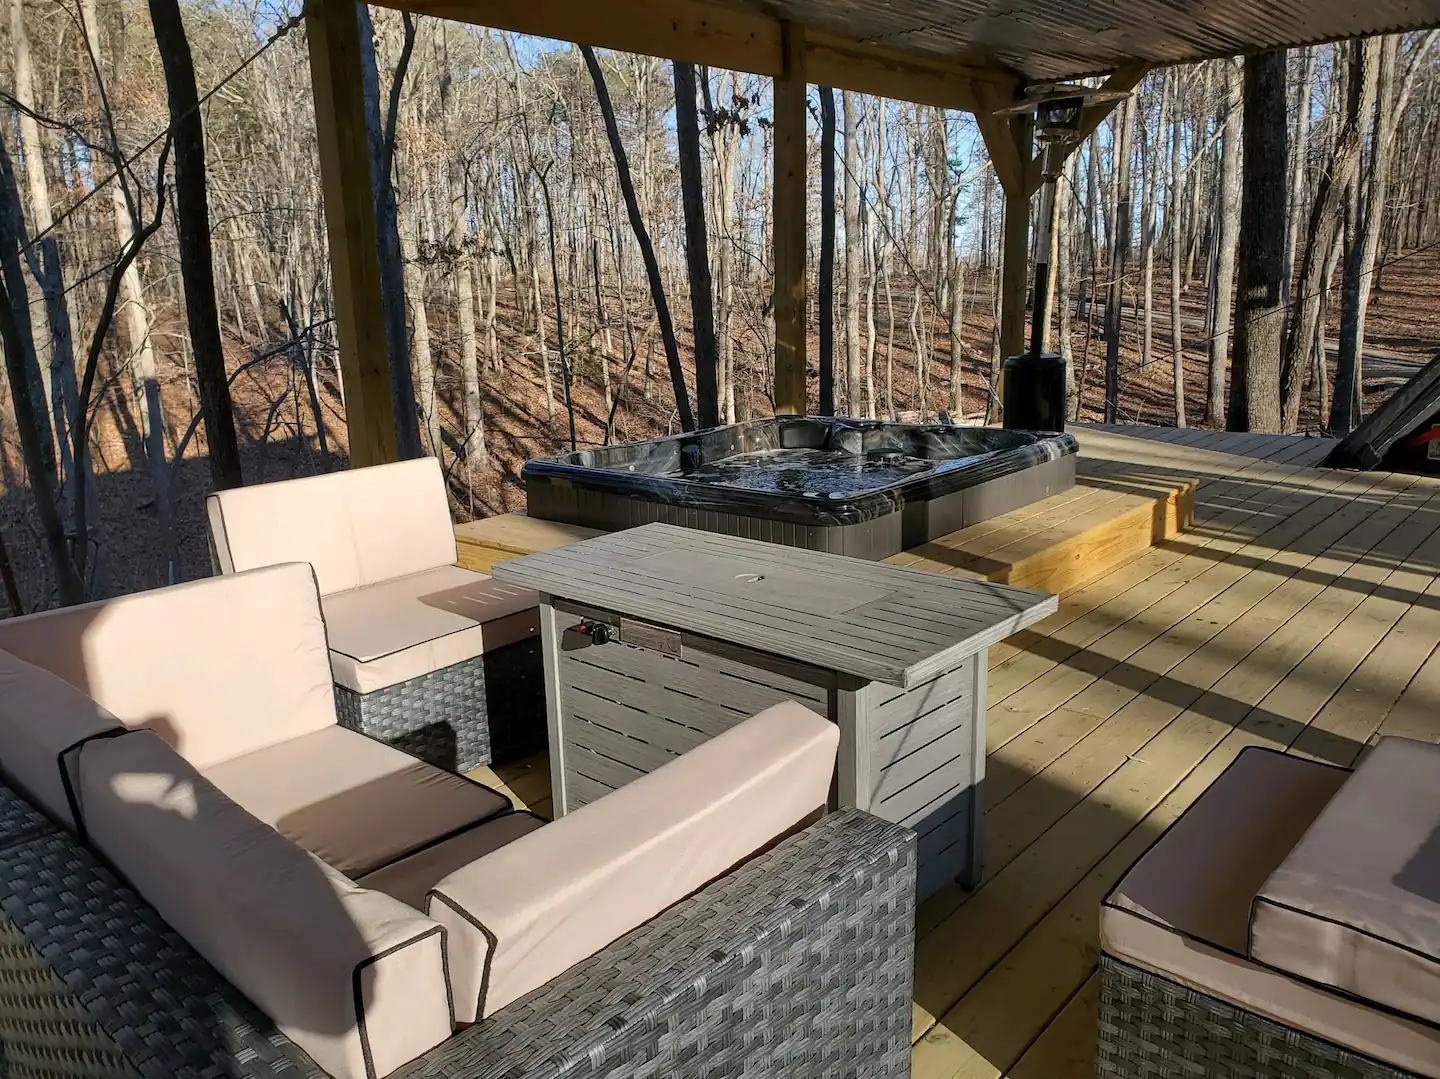 Large patio space to relax in.